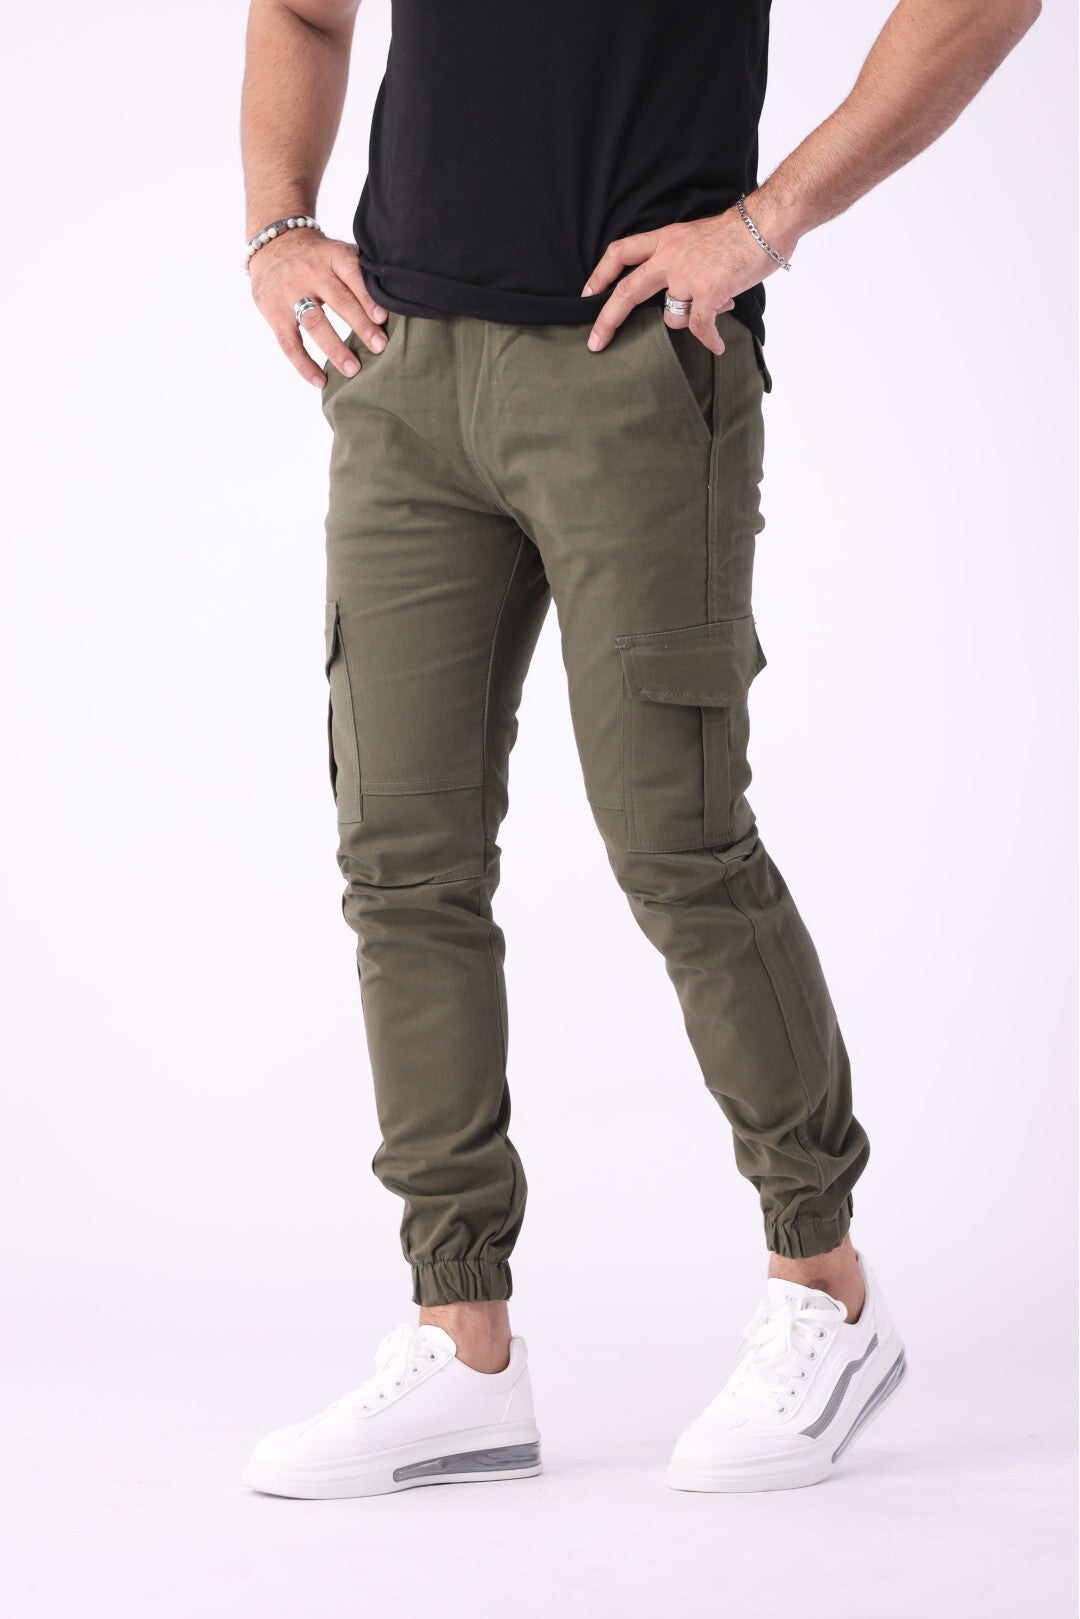 Cargo Six Pocket Trousers for Men, Army Green 6 Pocket Cargo Pant